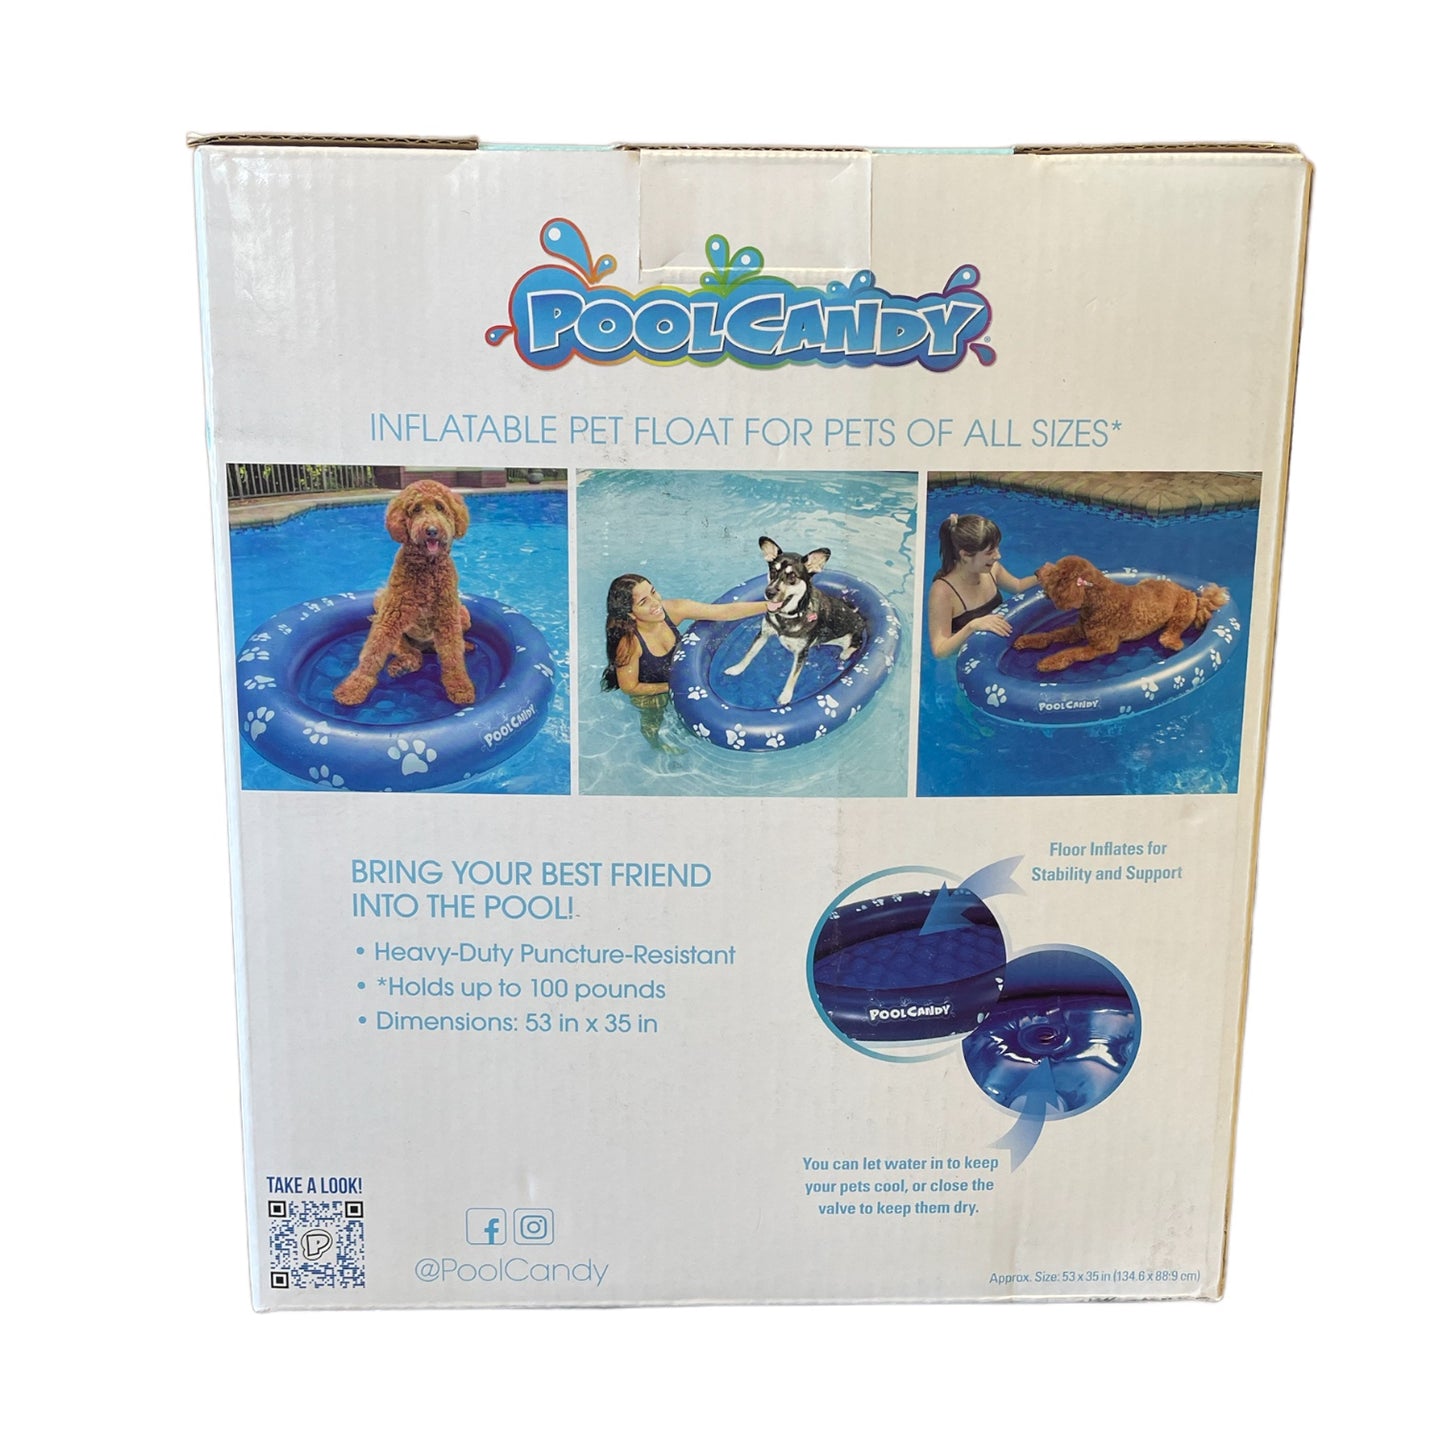 PoolCandy Inflatable Pet Float for All Size Dogs, Blue